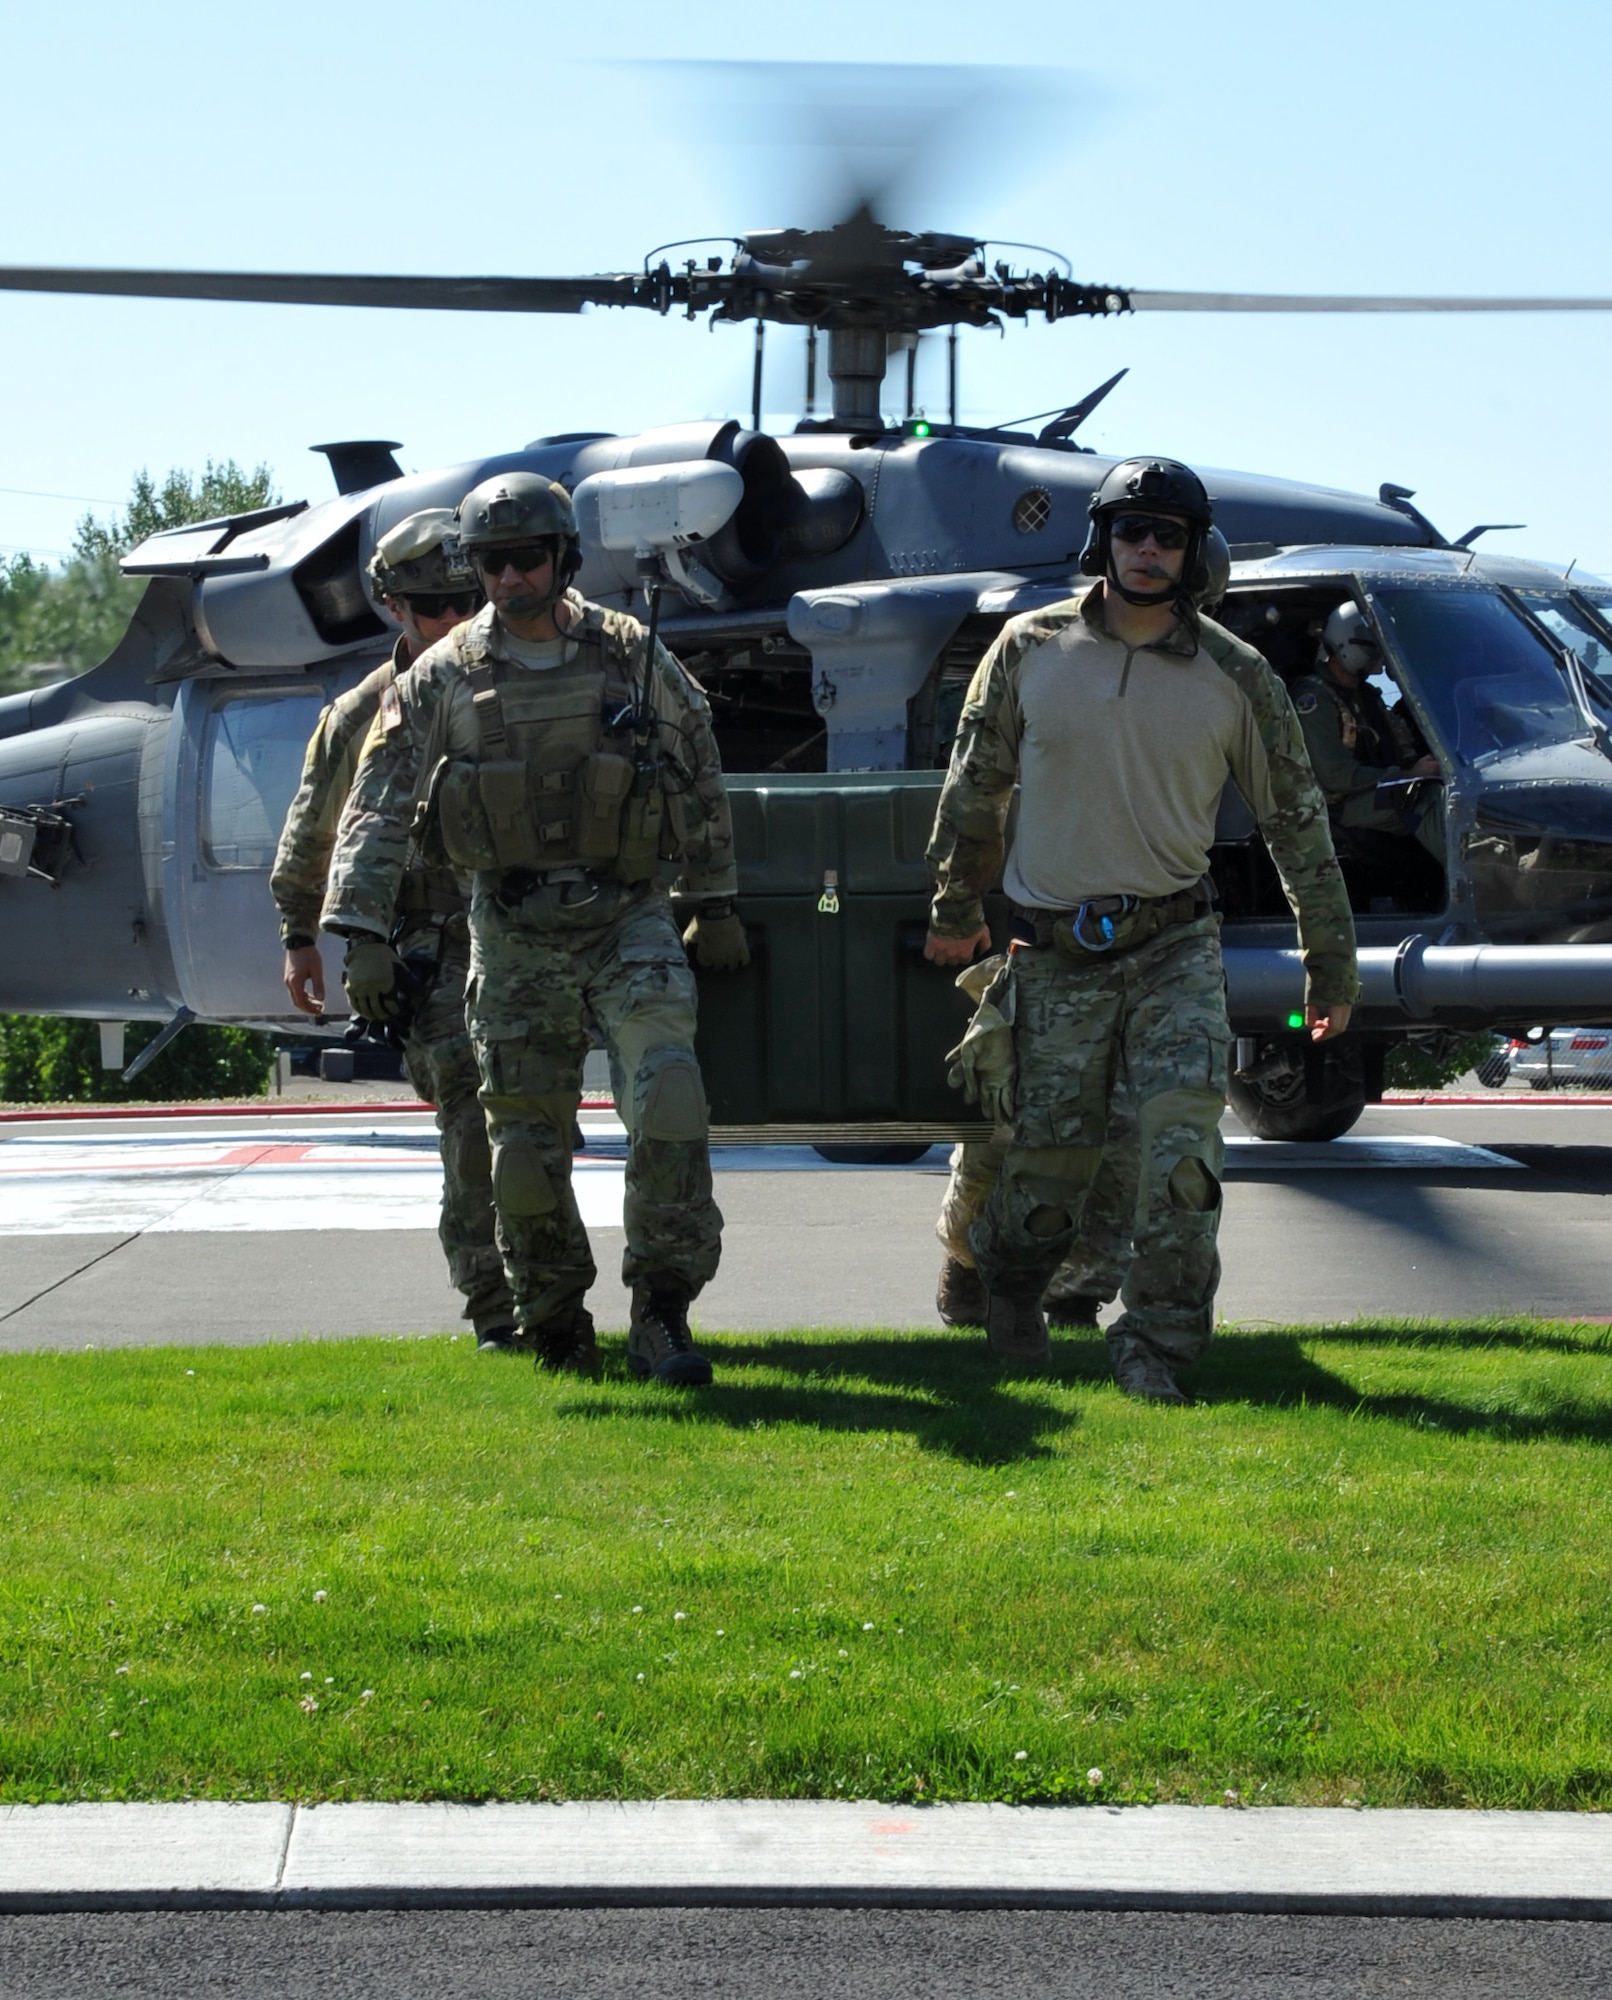 Pararescuemen from the 304th Rescue Squadron off load toys at The Randall Children's Hospital at Legacy Emmanuel in Portland, Ore.  The PJ's arrived both by air, via HH-60 Pave Hawk helicopters from the 305th Rescue Squadron, and from the ground on Humvee's as they delivered toy's room to room in the children's hospital. (U.S. Air Force Photo/ Master Sgt, Luke Johnson)